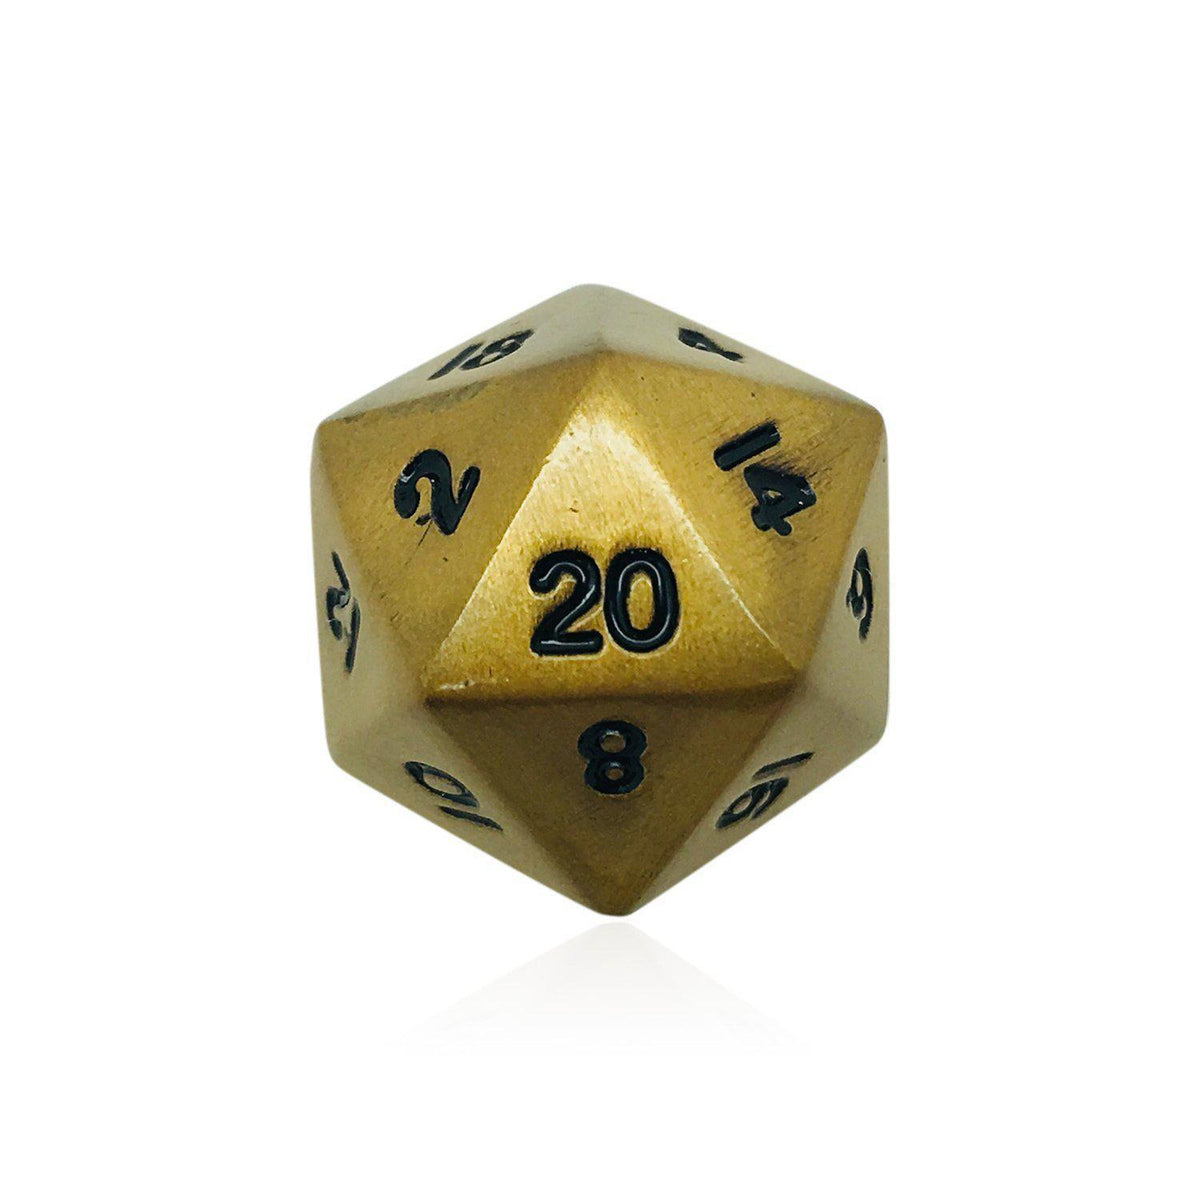 Single Alloy D20 in Dragons Gold by Norse Foundry-Dice-Norse Foundry-DND Dice-Polyhedral Dice-D20-Metal Dice-Precision Dice-Luxury Dice-Dungeons and Dragons-D&amp;D-